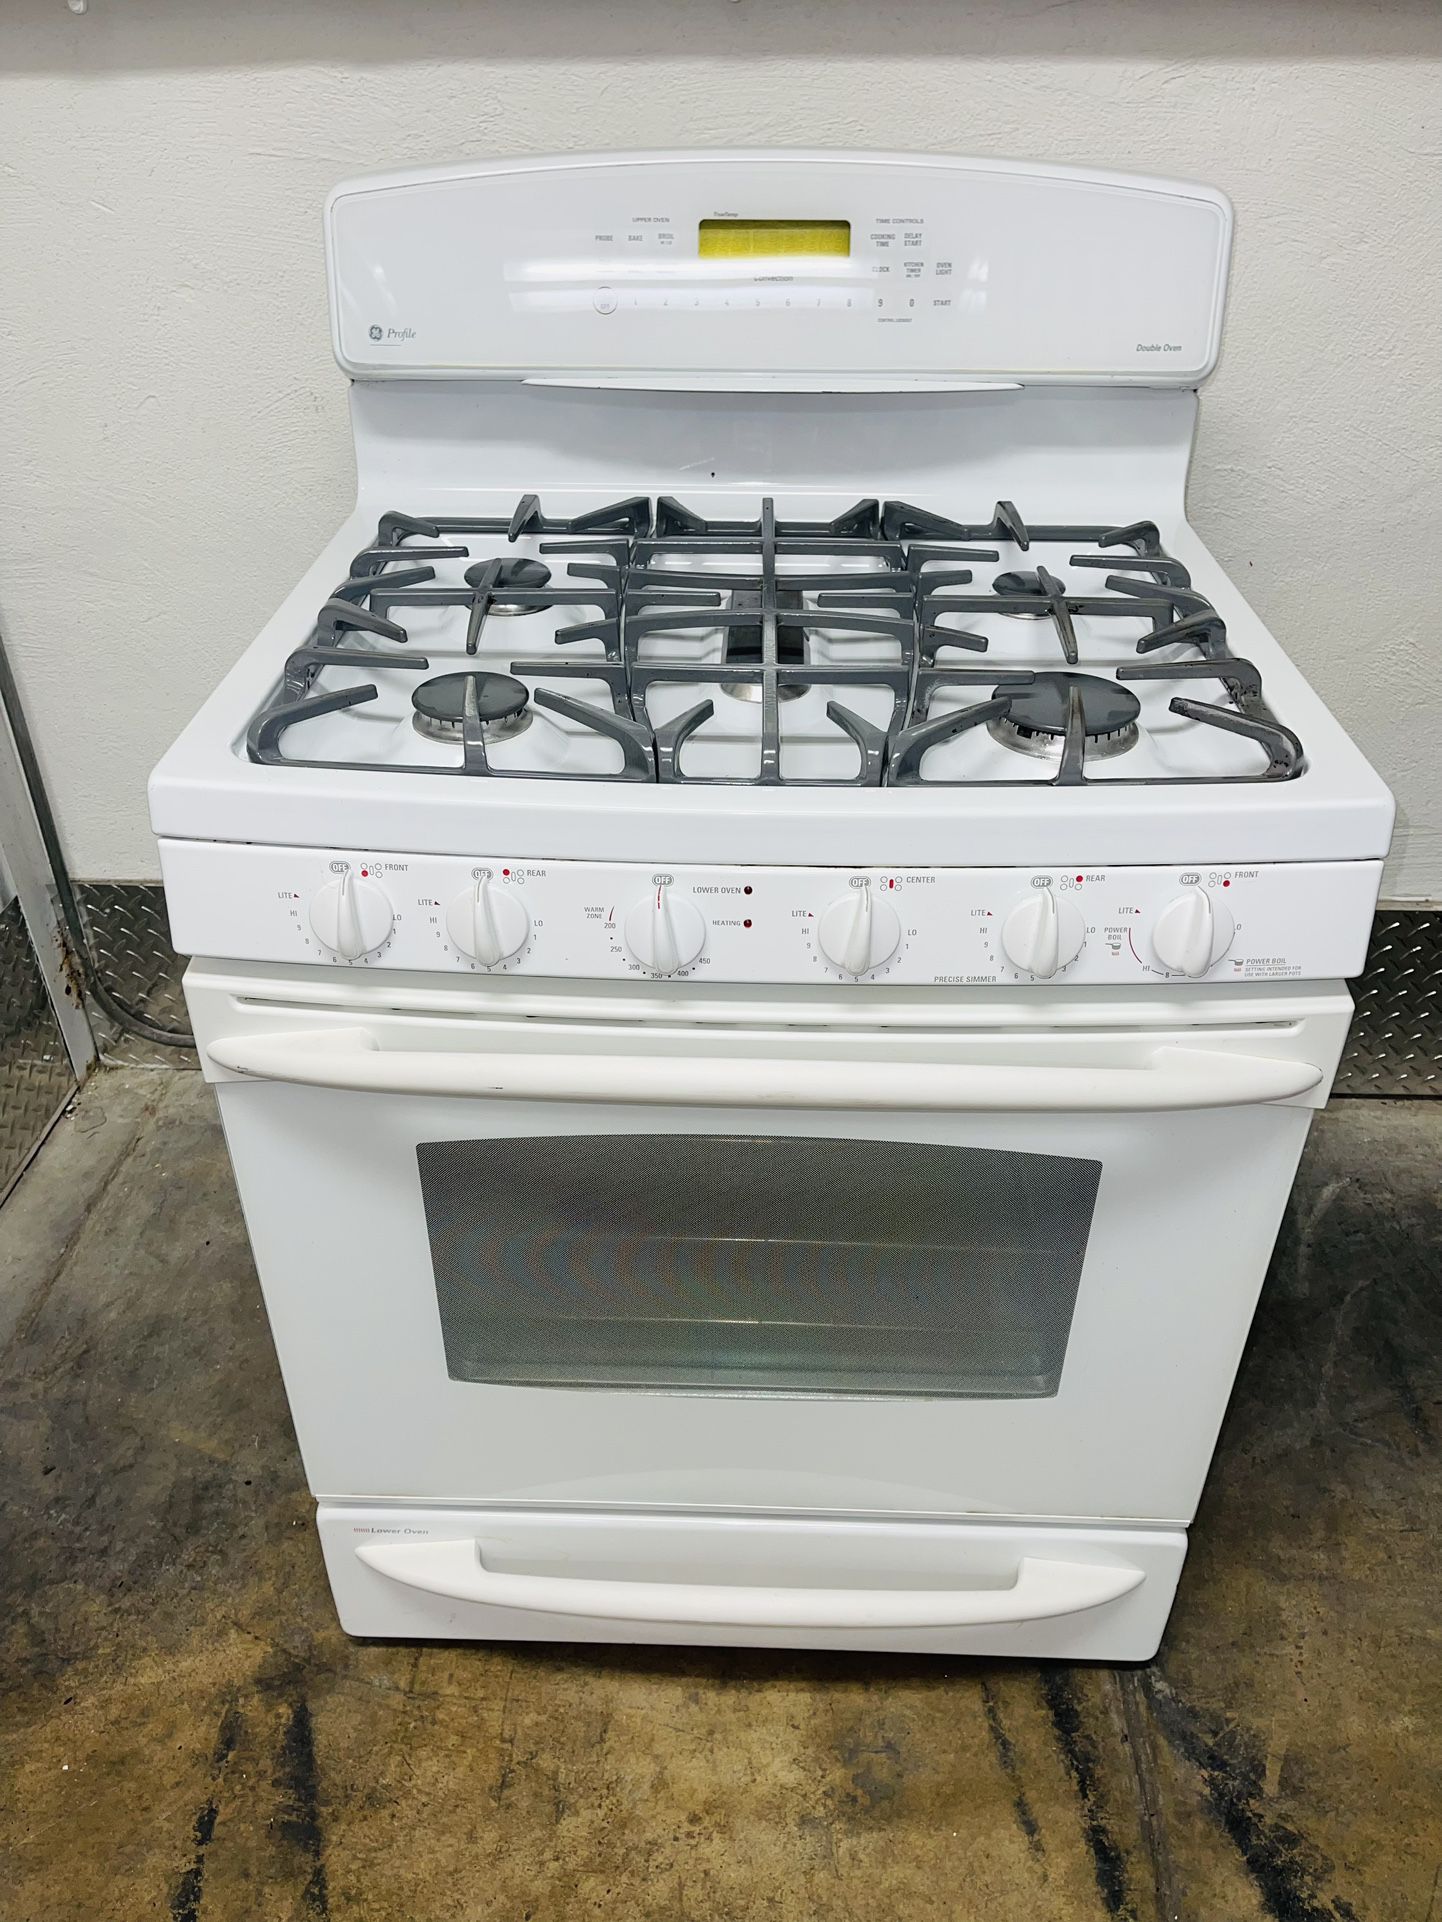 GE gas stove in very perfect condition a receipt for 60 days warranty